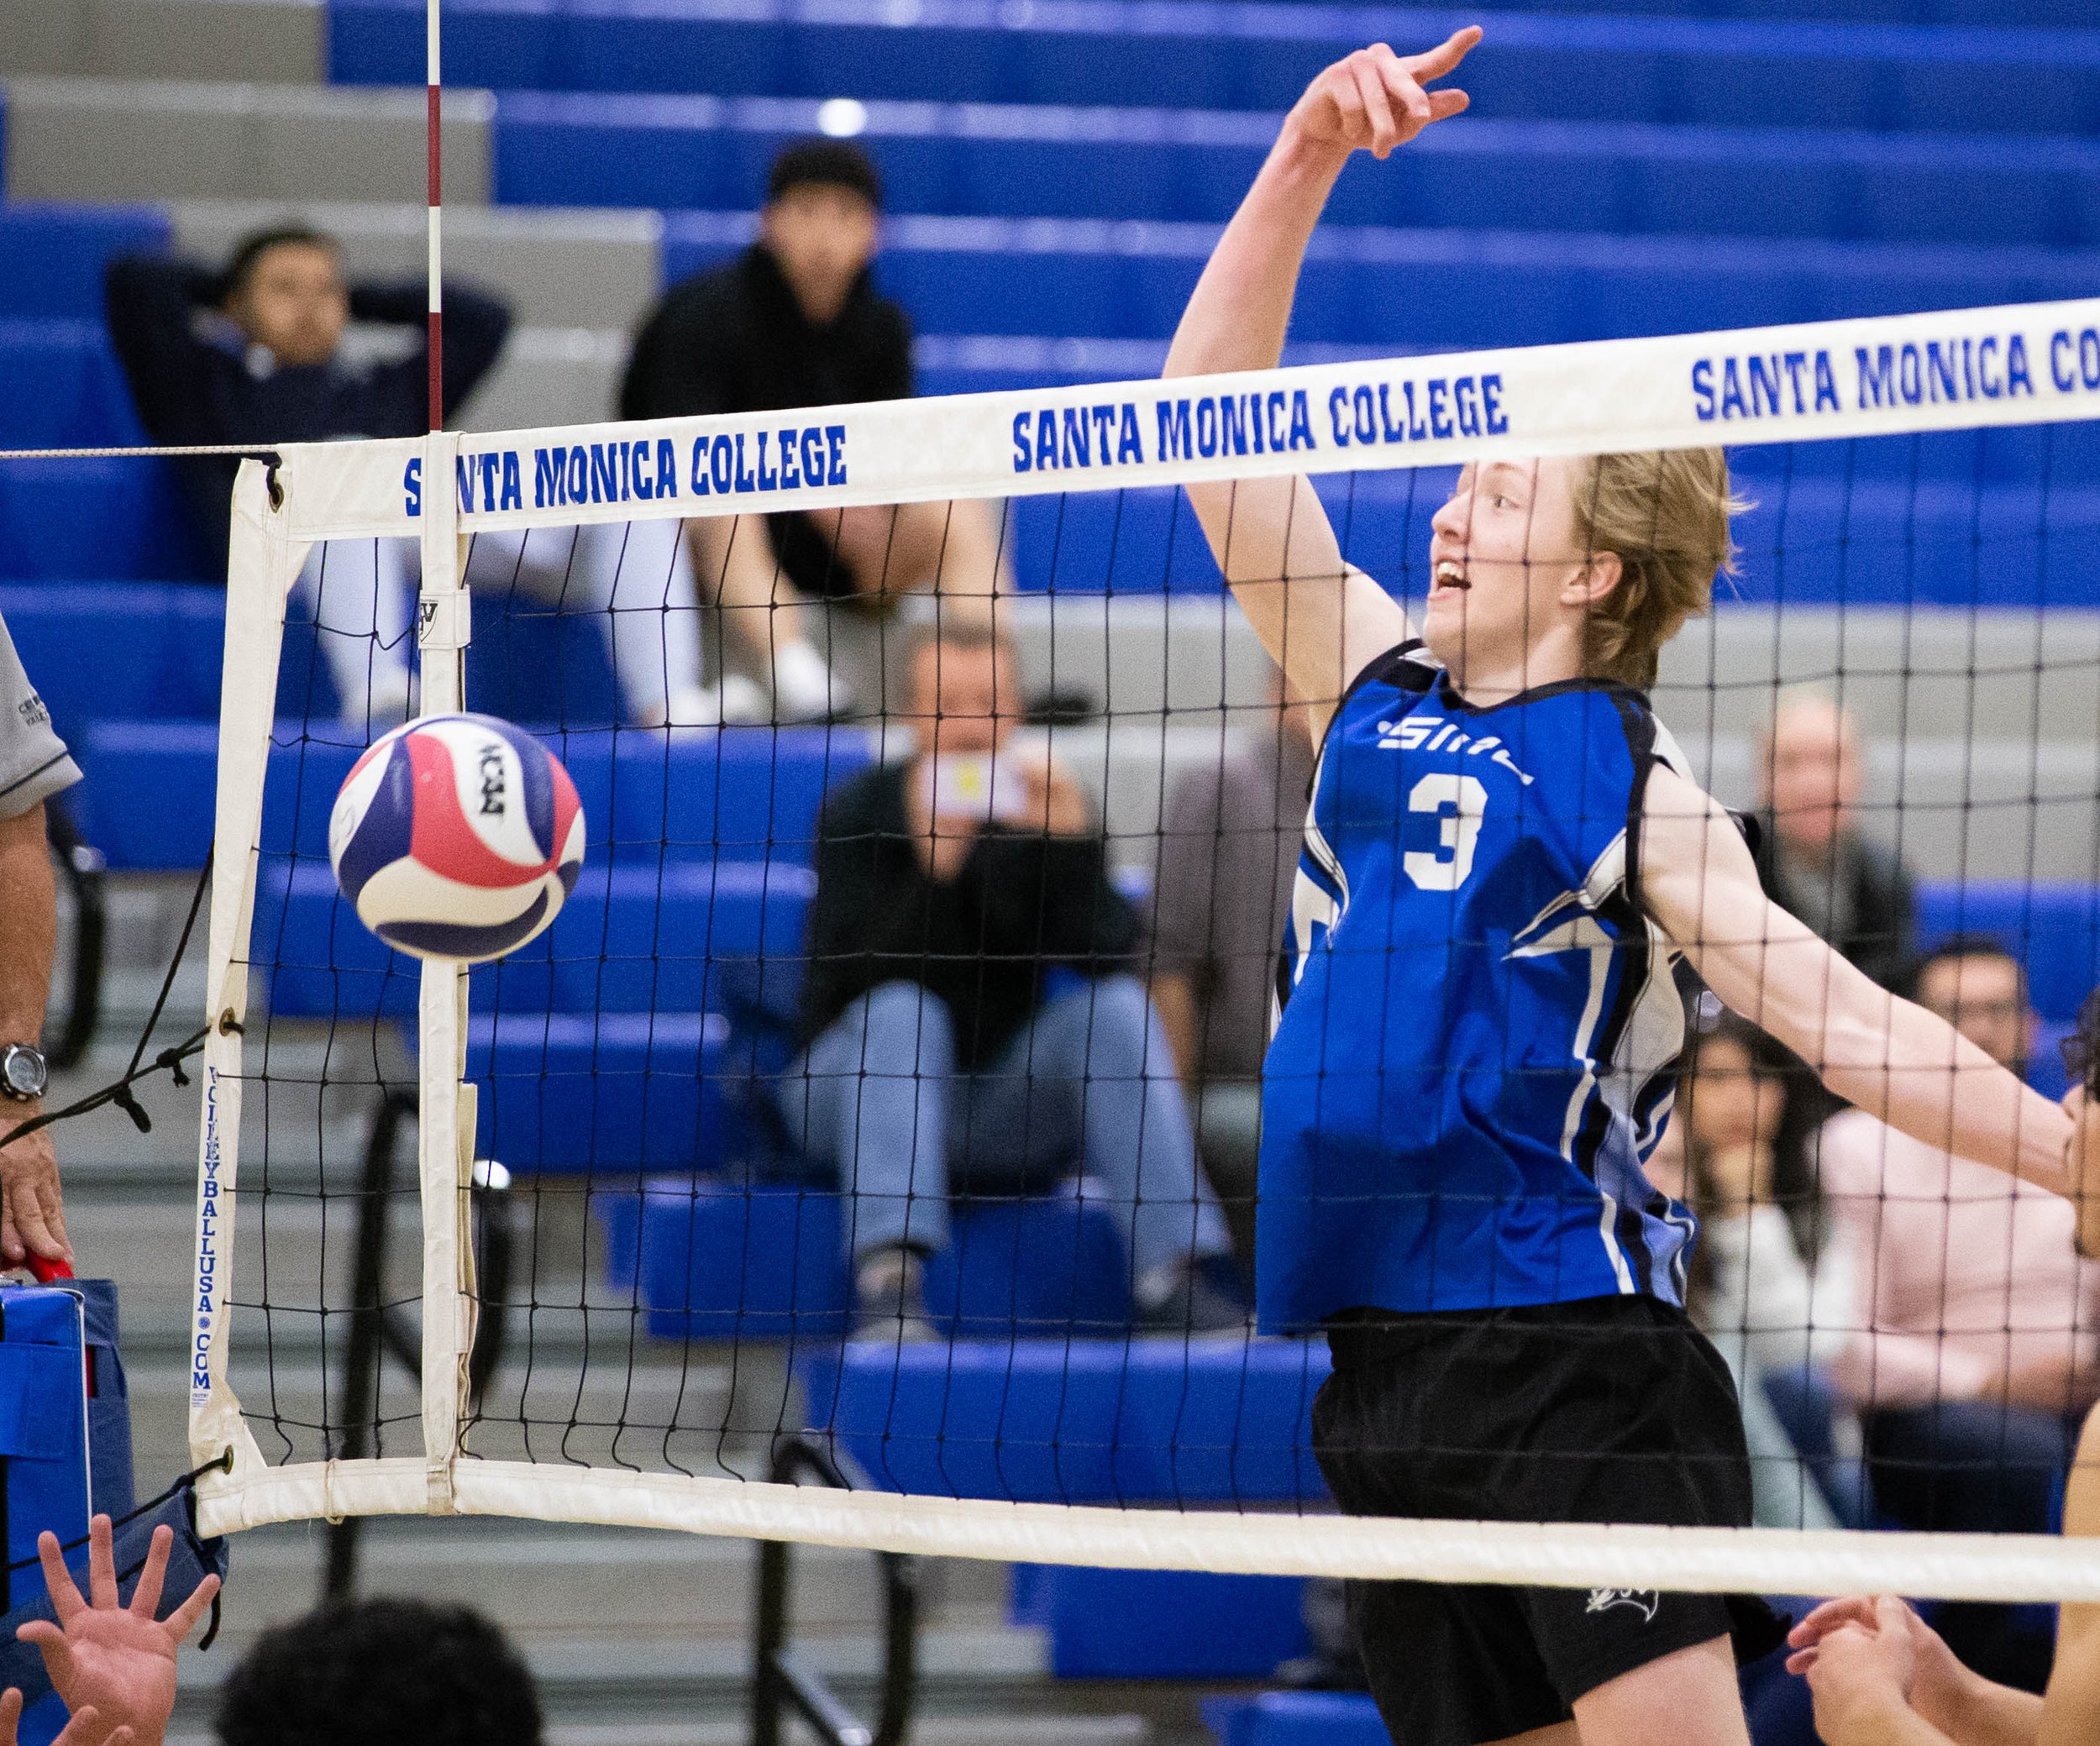  Camden Higbee(3), setter, for the Santa Monica College(SMC) Corsairs faking a strike set up but confusing L.A. Pierce College Braham Bulls by tapping it to their side of the court for the point on Wed. March 15, 2023 in the SMC Pavillion at Santa Mo